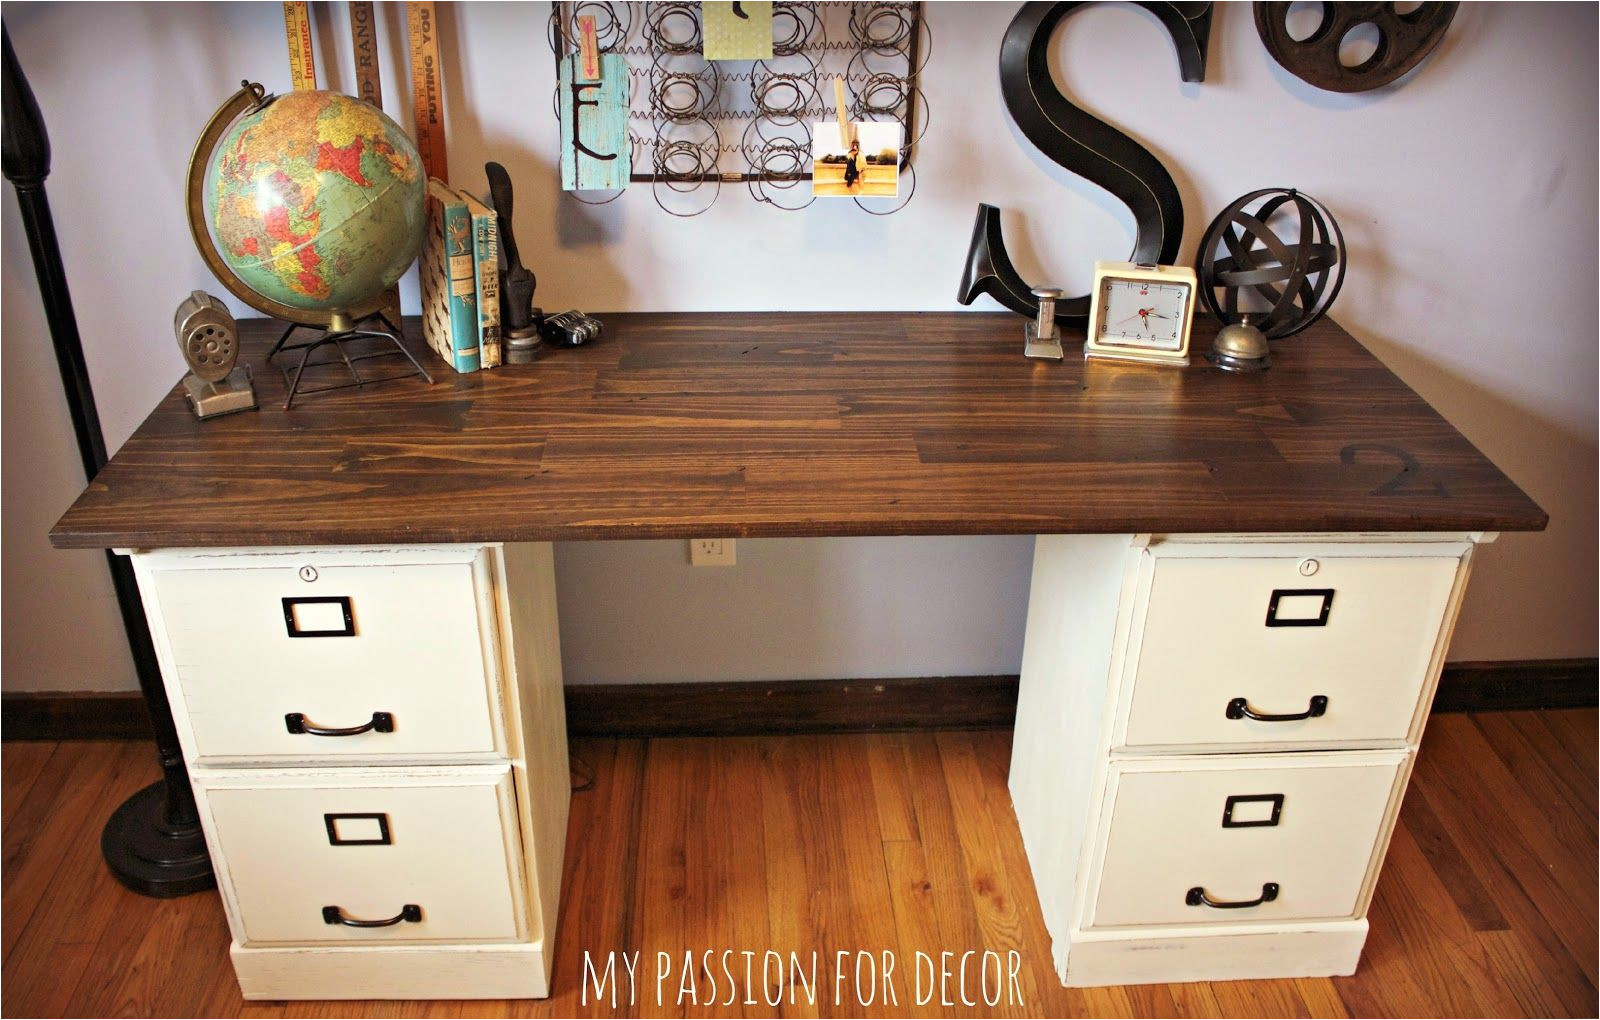 Diy Desk with File Cabinet Pottery Barn Inspired Desk Using Goodwill Filing Cabinets In 2019